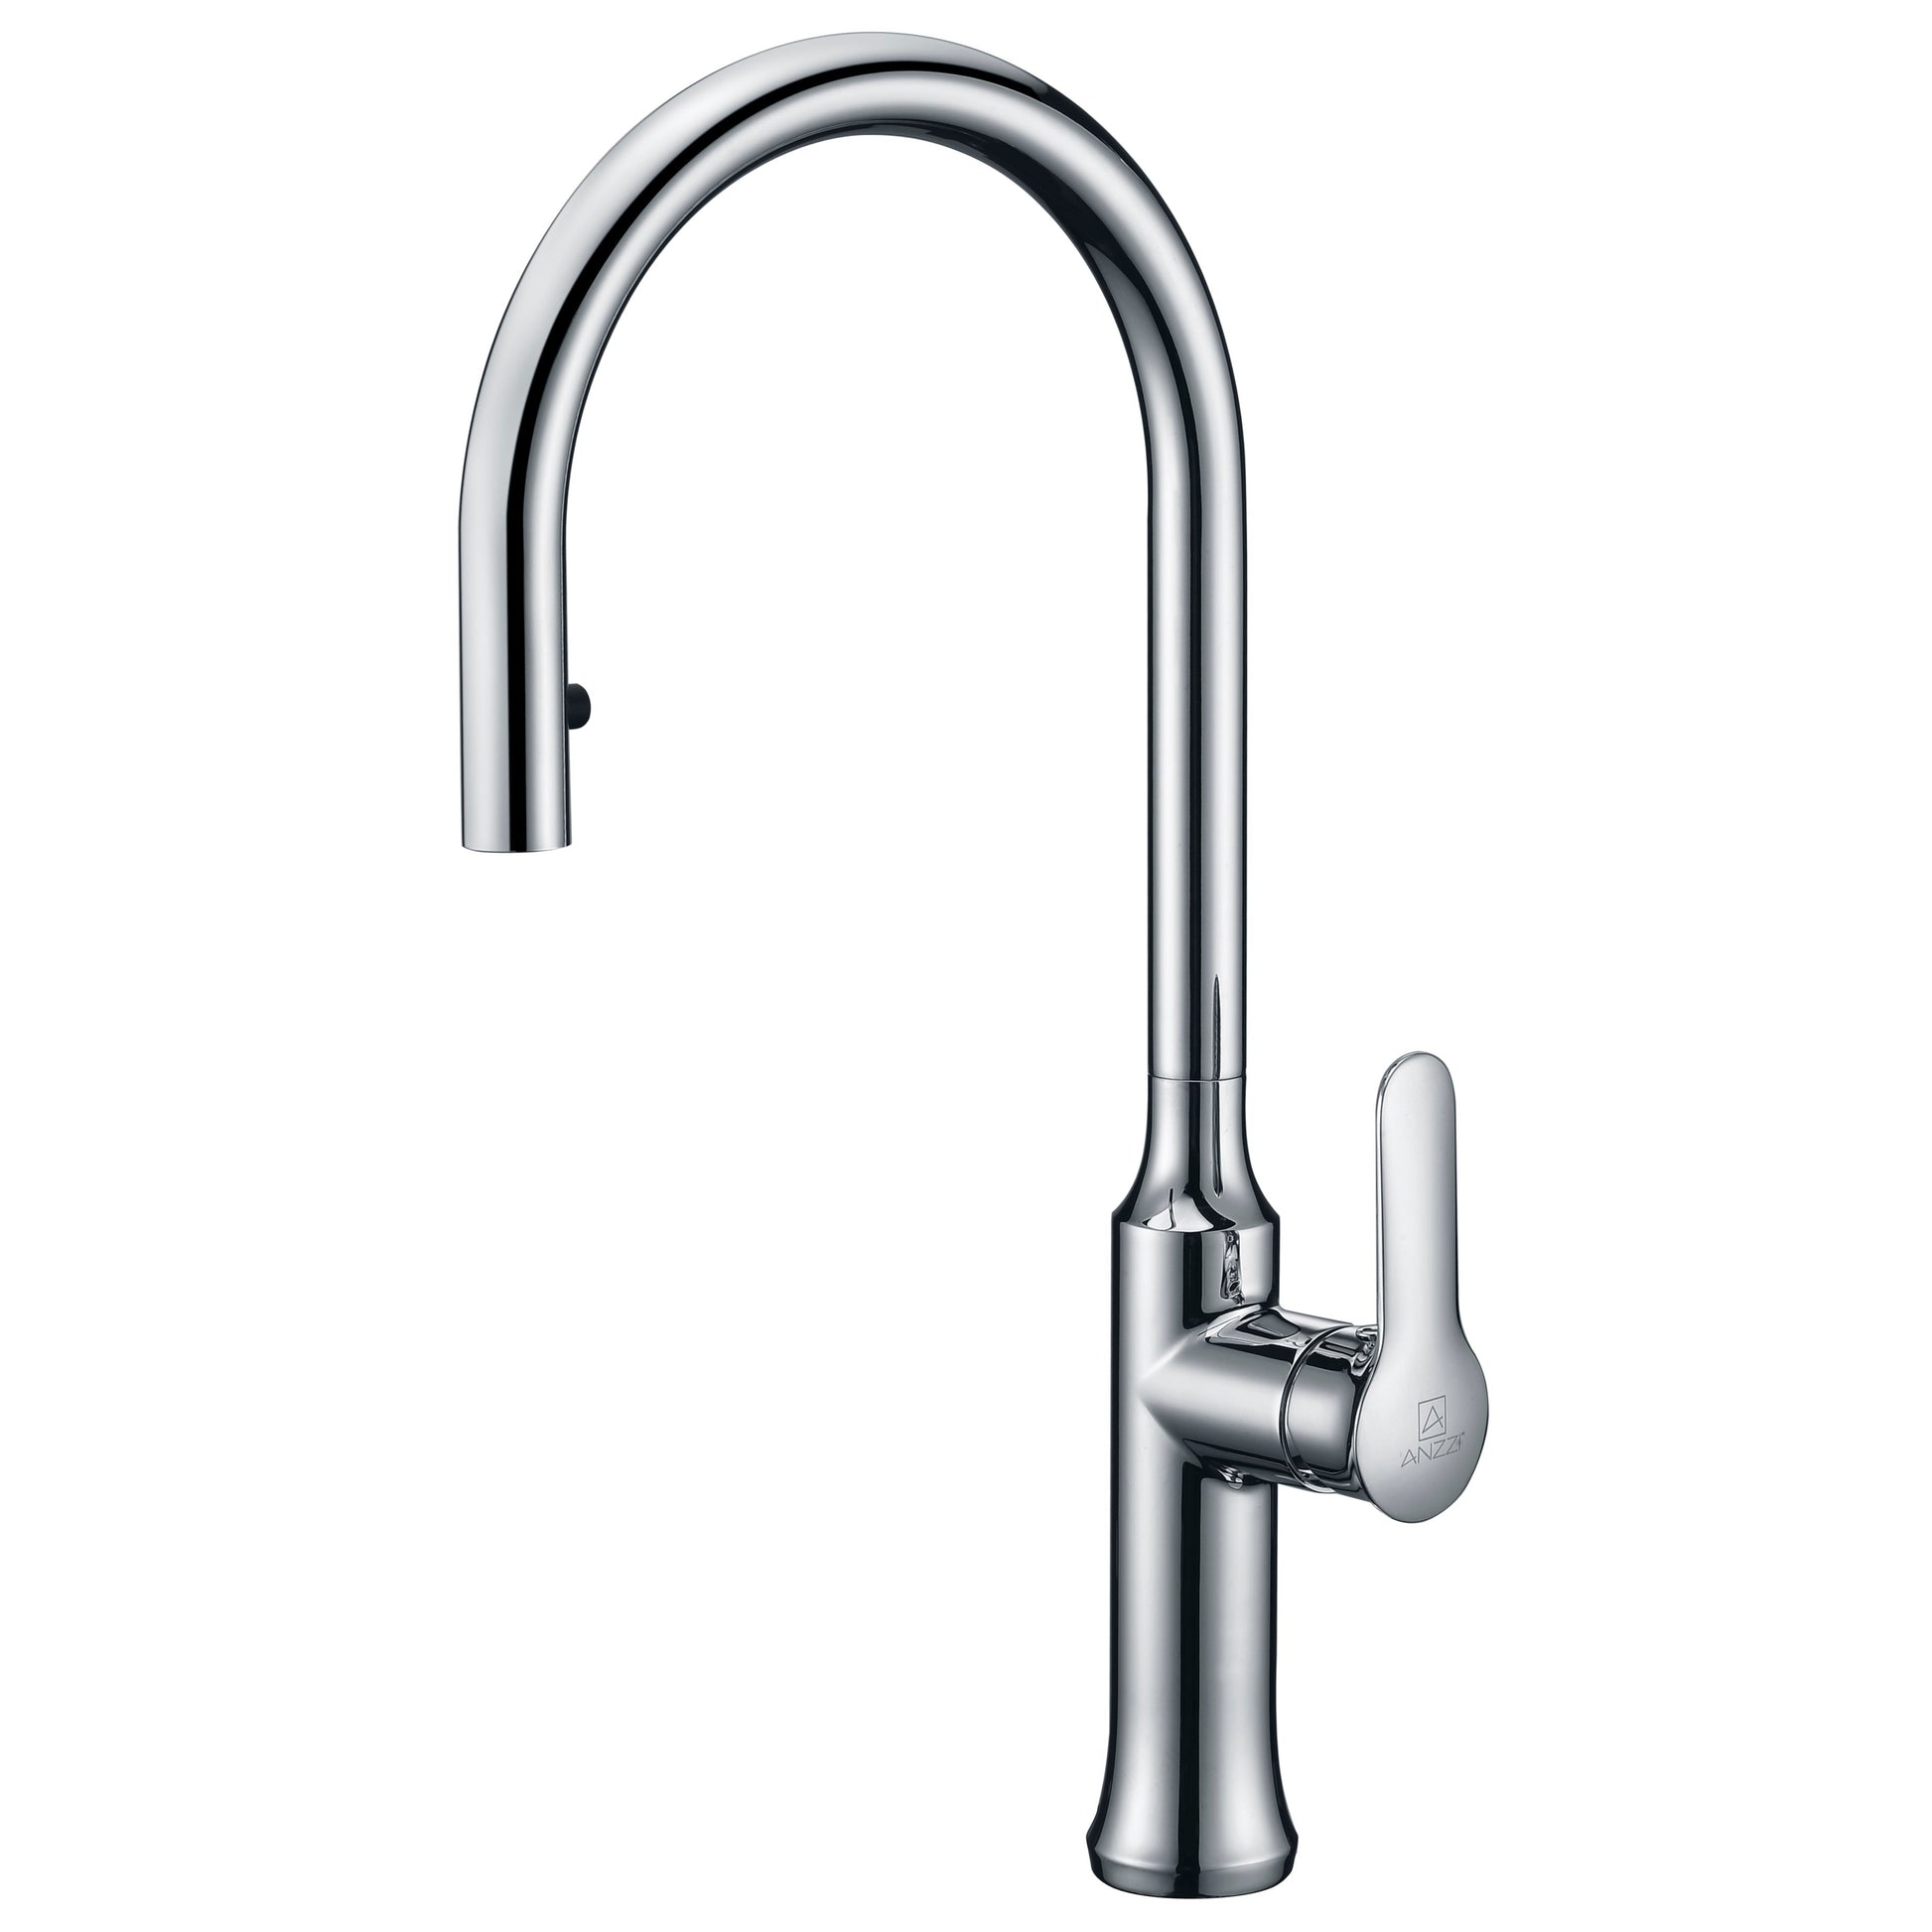 ANZZI Crescent Series Single Hole Polished Chrome Kitchen Faucet With Euro-Grip Pull Down Sprayer